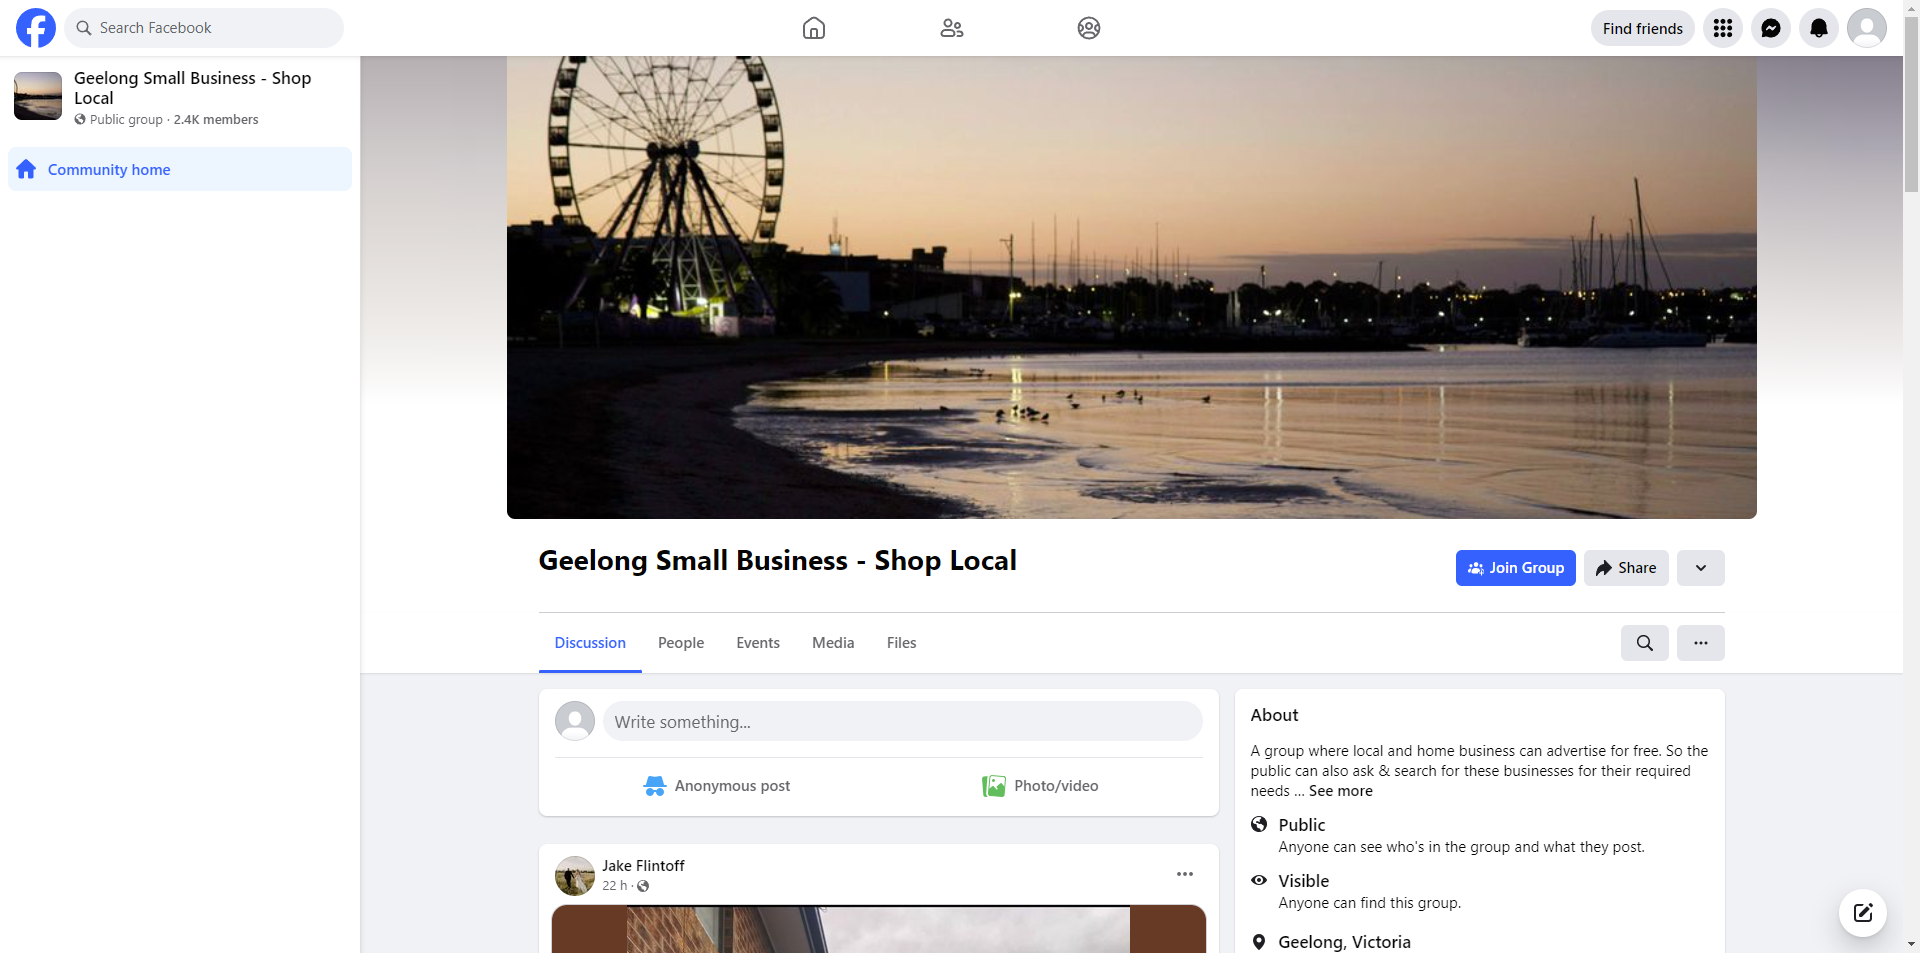 Geelong Small Business - Shop Local